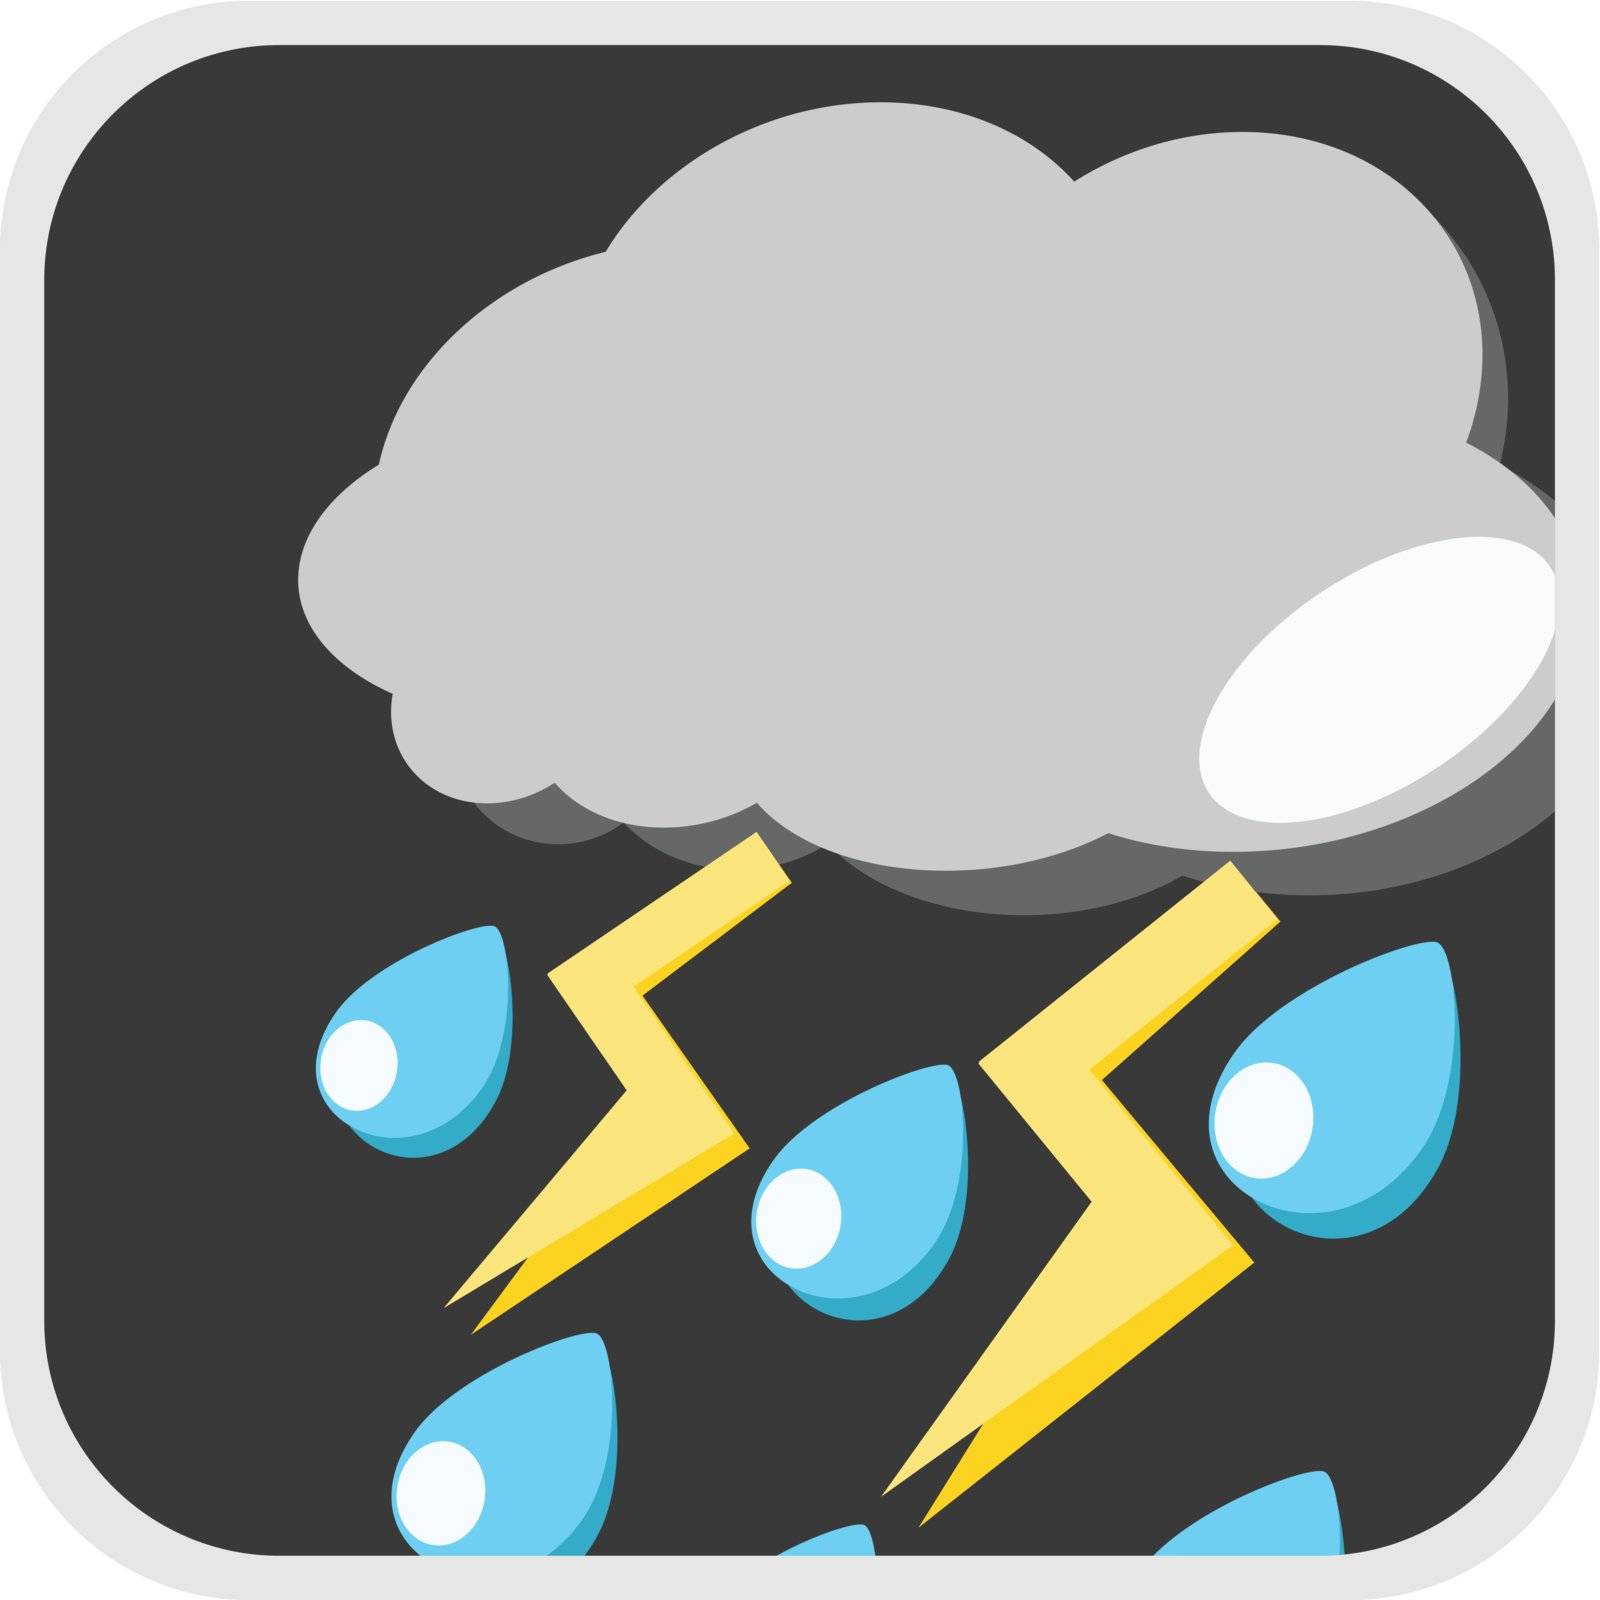 Rain storm symbol sign in the weather nature illustration